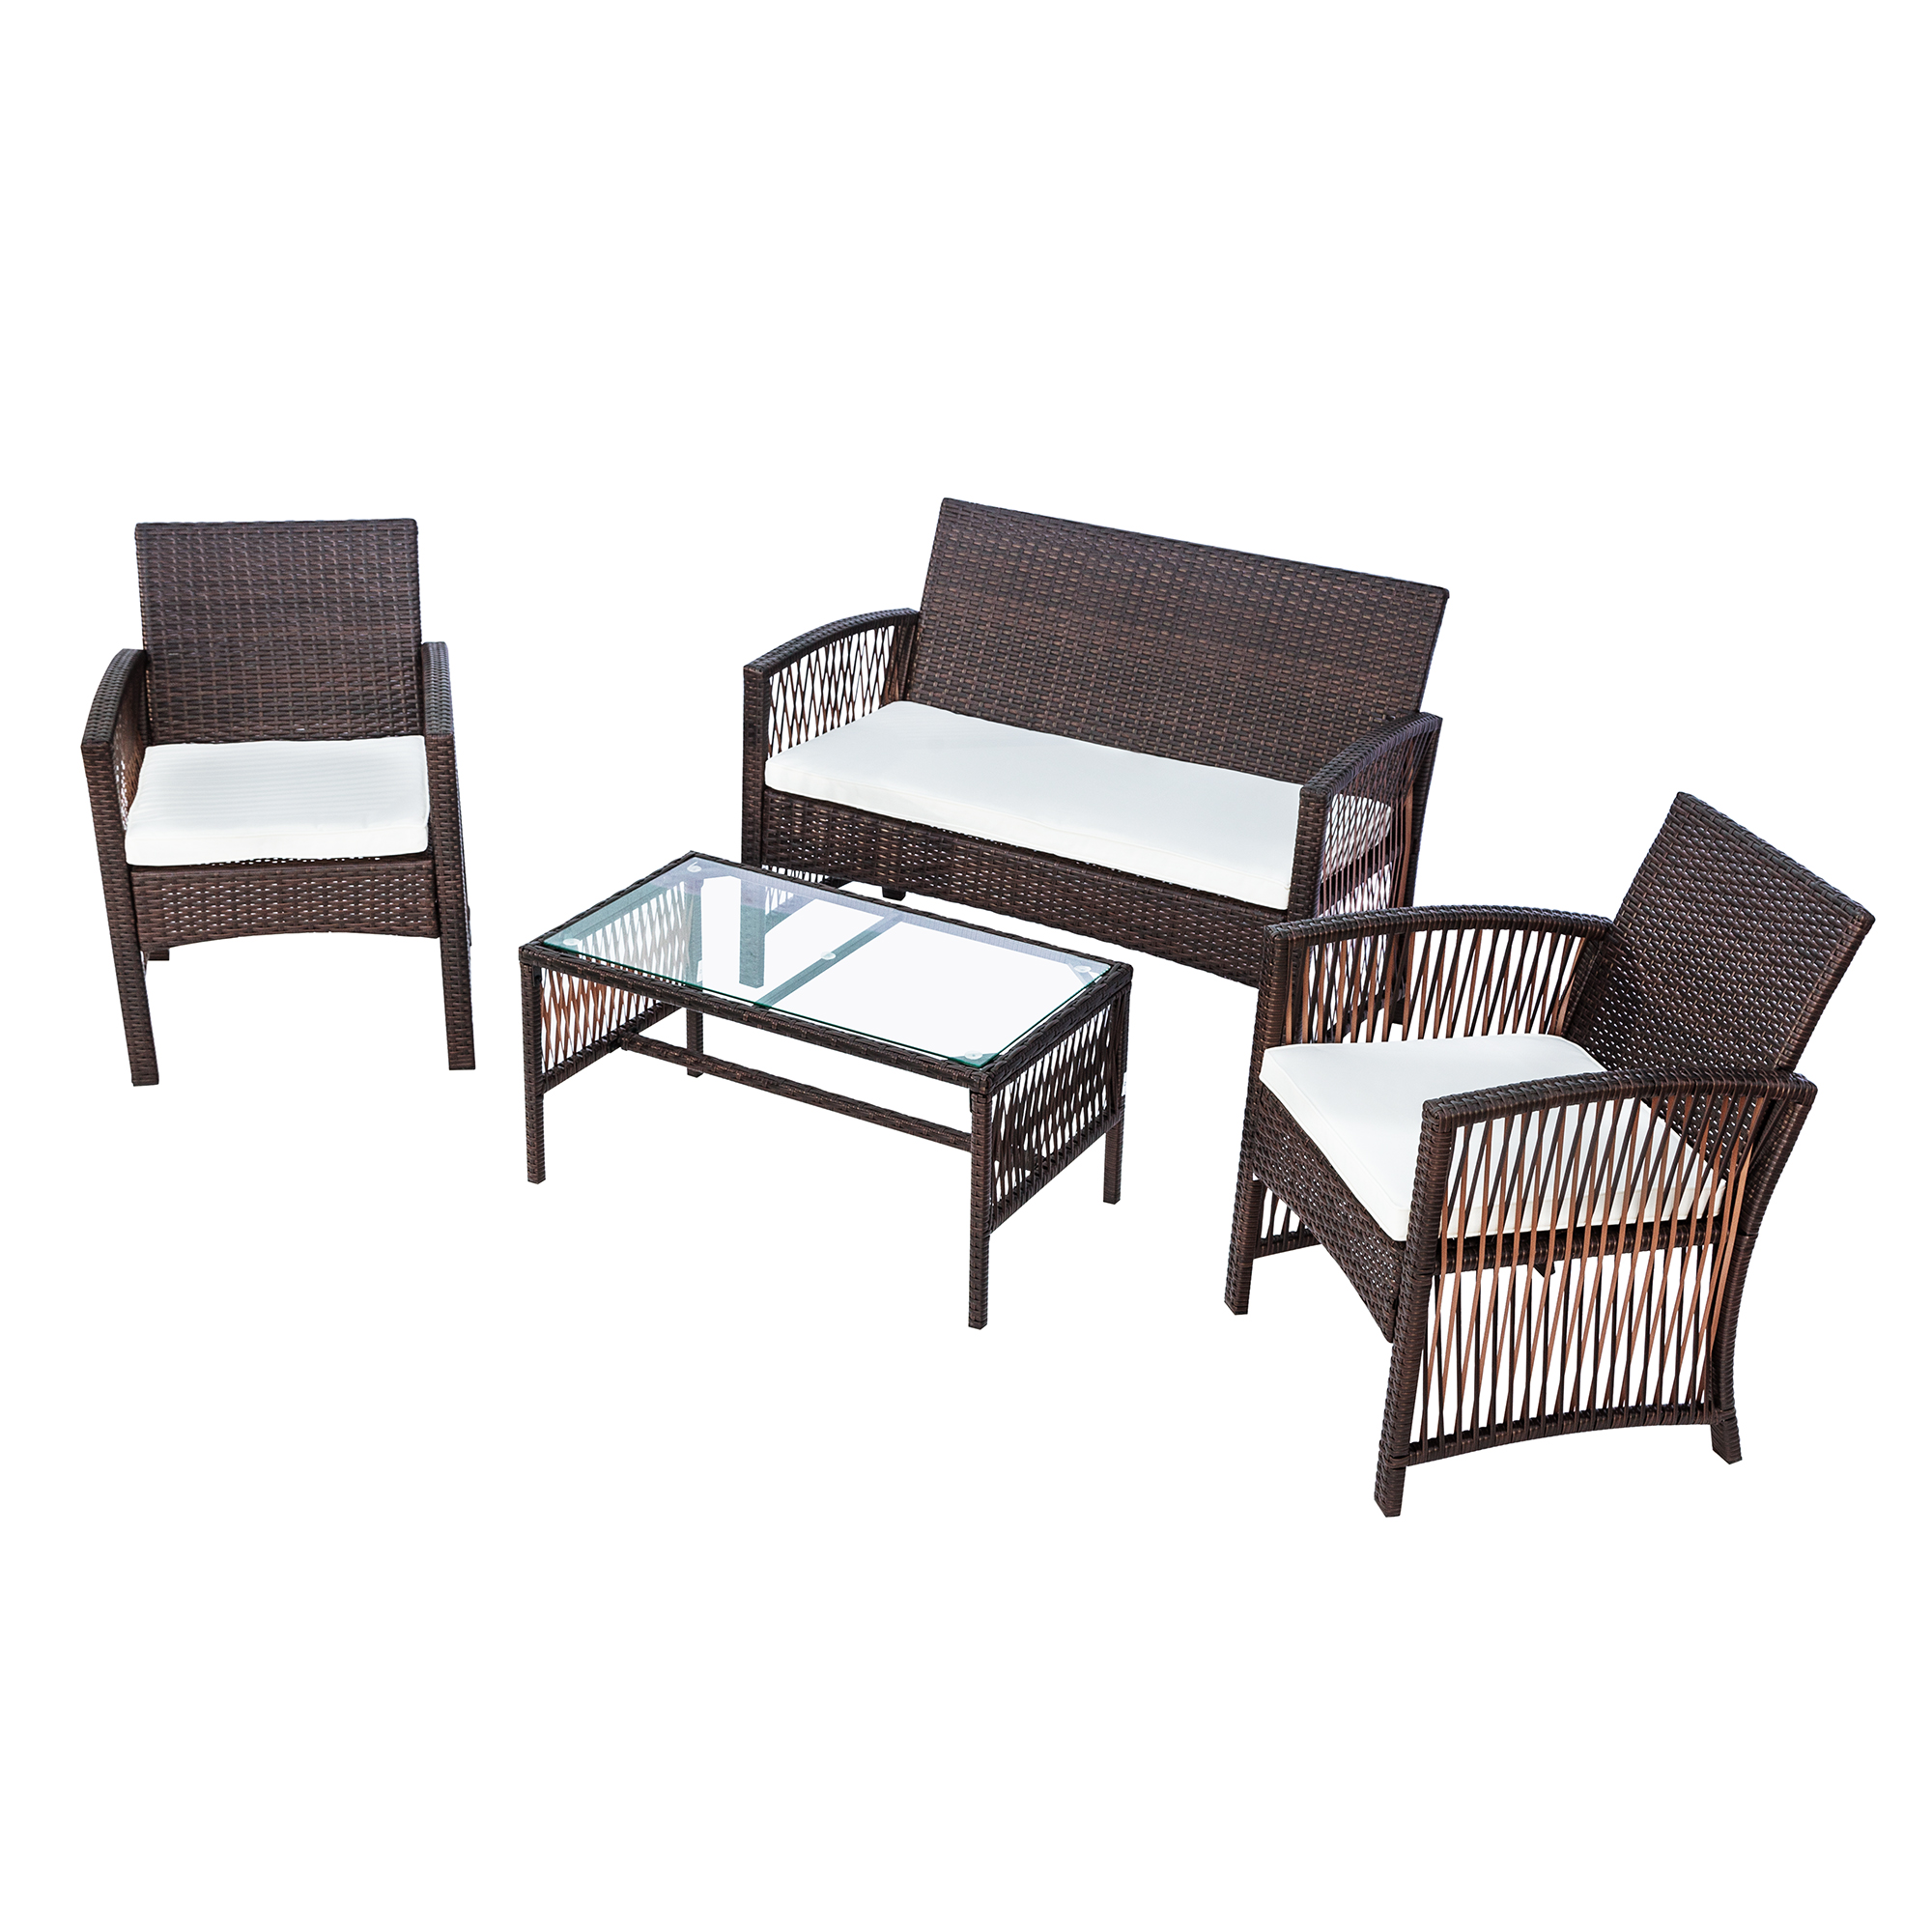 4 Piece Bistro Patio Set, Rattan Wicker Outdoor Patio Furniture Dining Sets, 2pcs Arm Chairs 1pc Love Seat&Coffee Table, Outdoor Conversation Sets for Backyard Poolside Garden, Brown, W7783 - image 4 of 11